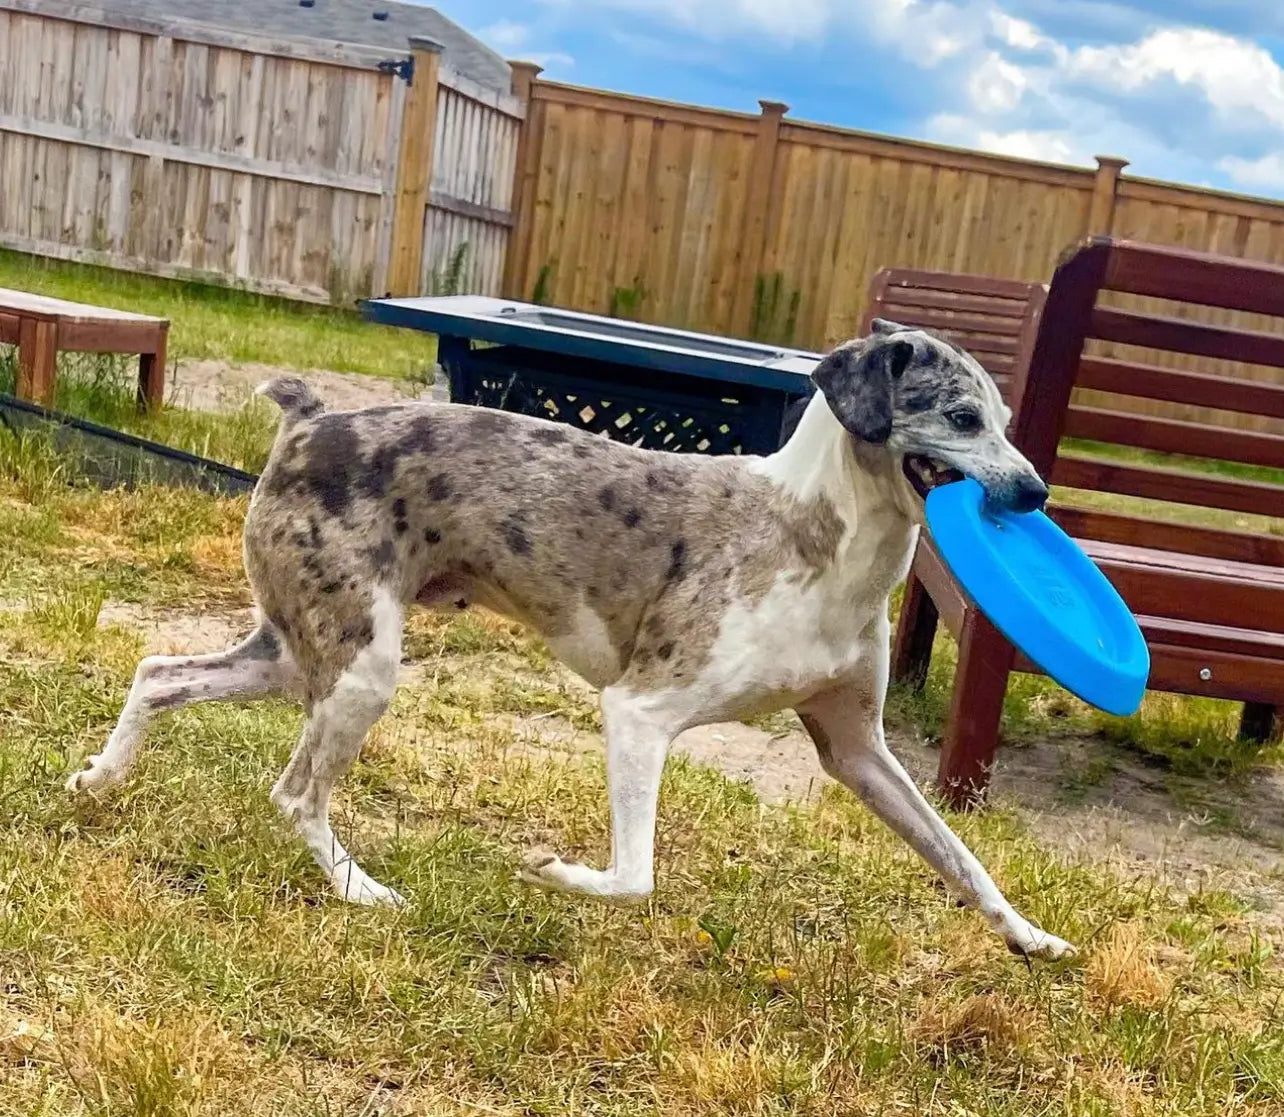 Dog running with a blue dog frisbee in it's mouth.